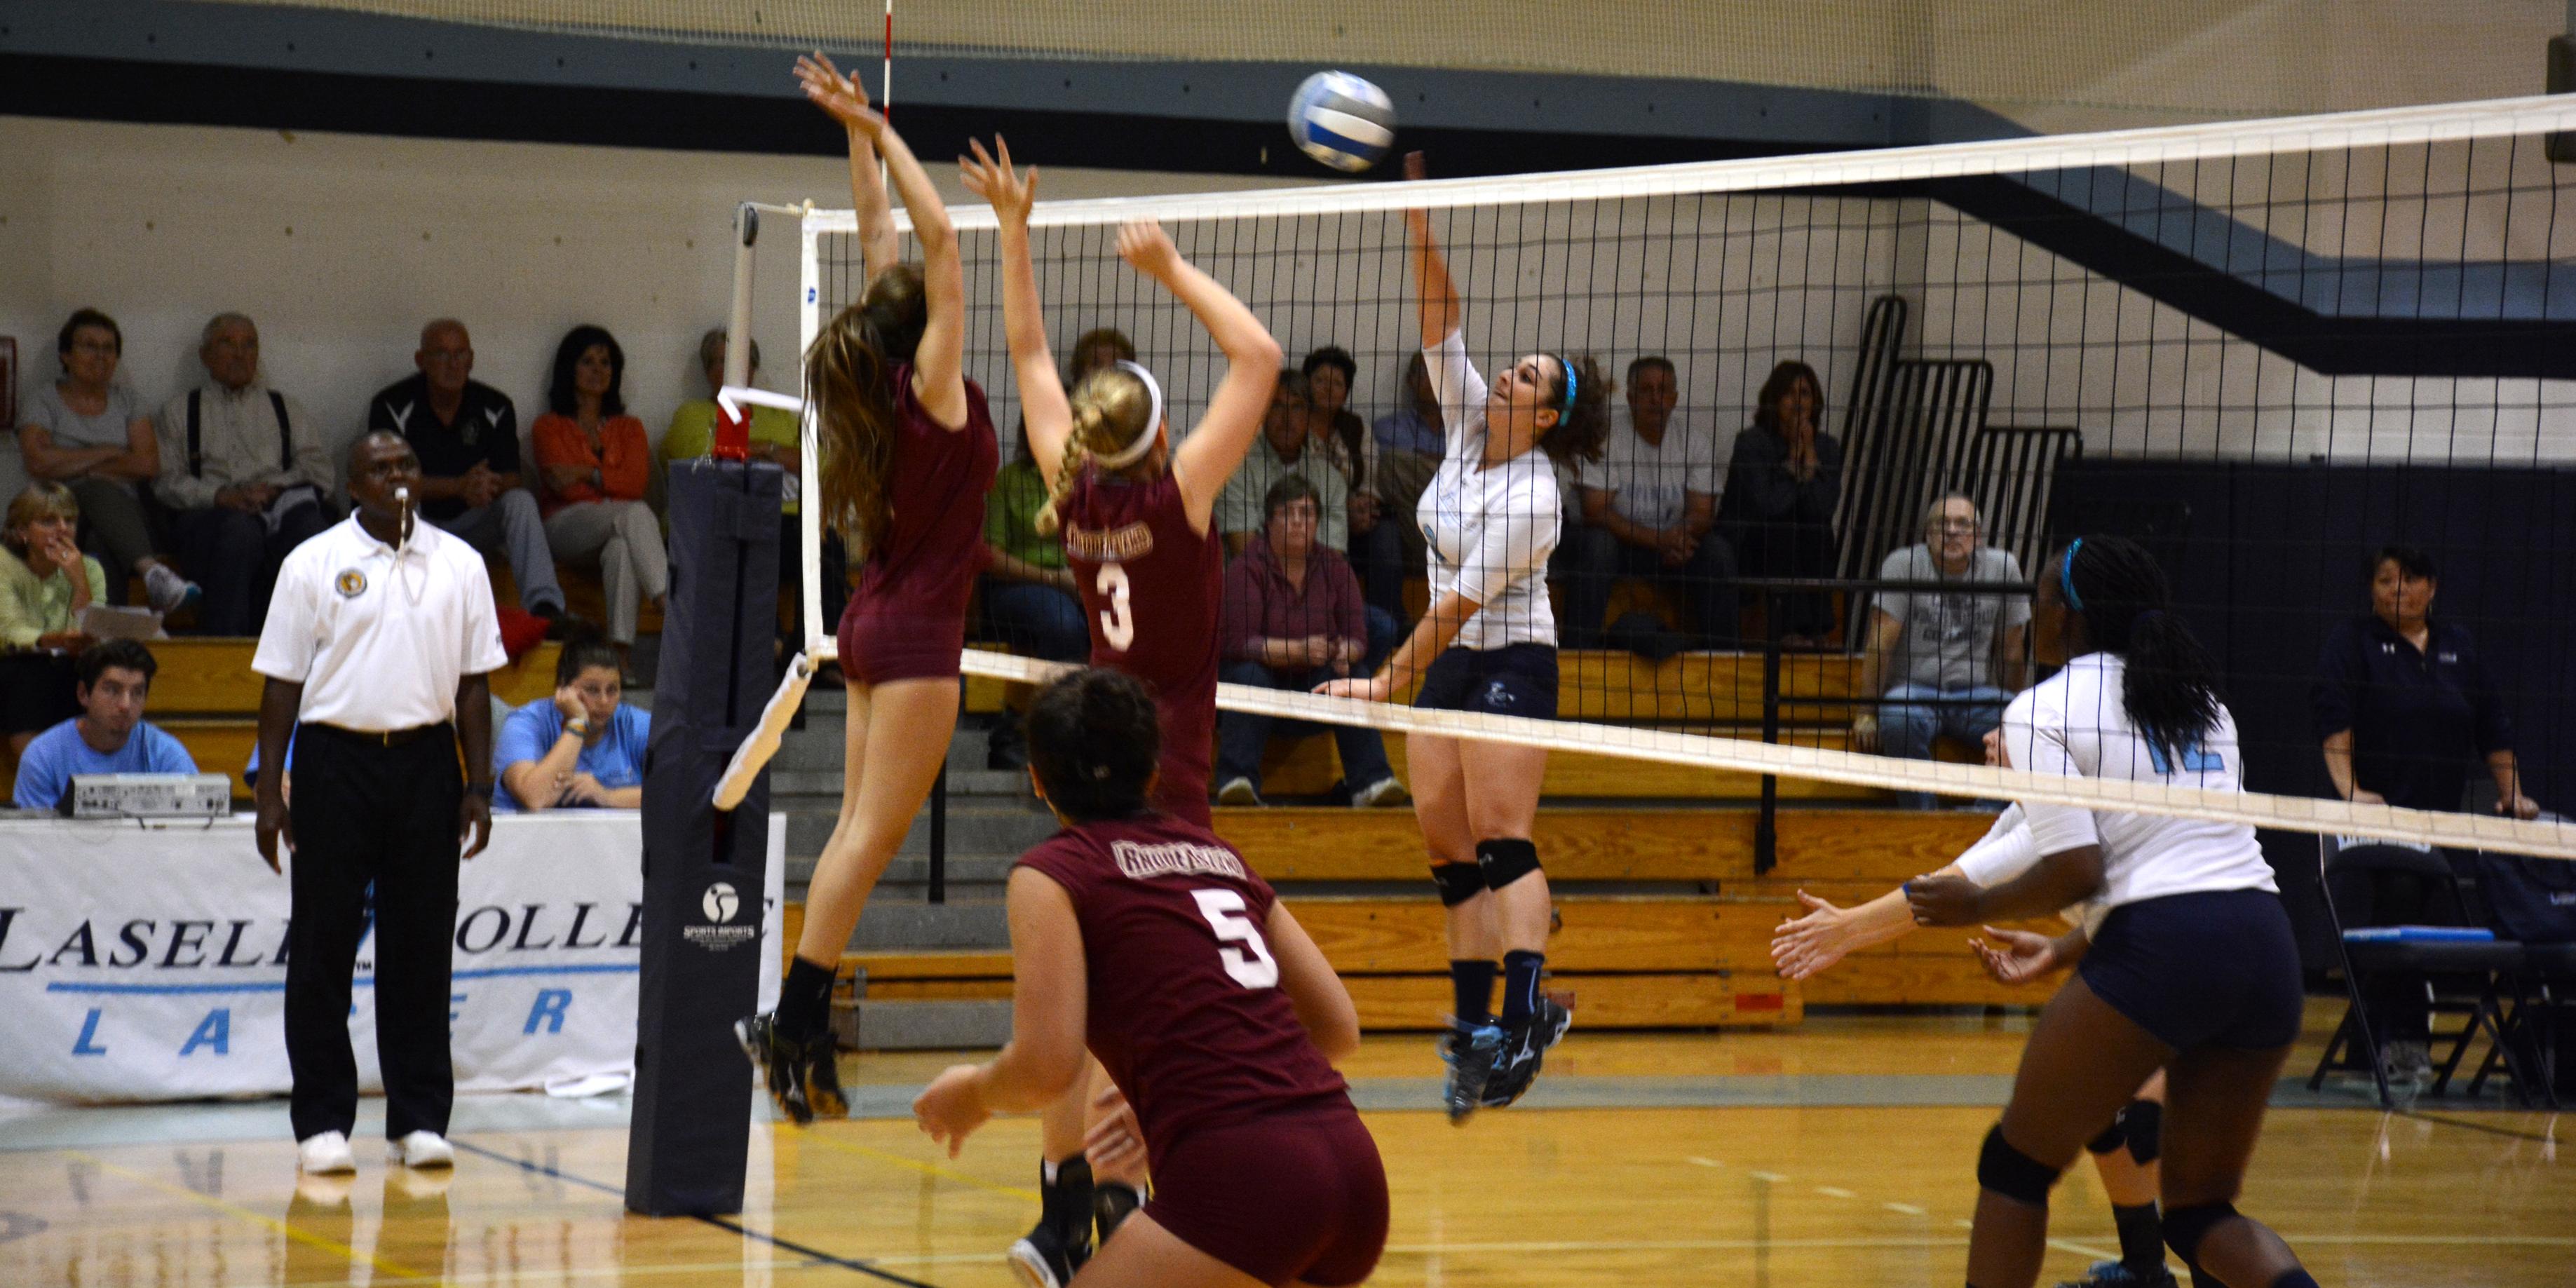 Panthers Stop Lasell, 3-0 in Women's Volleyball